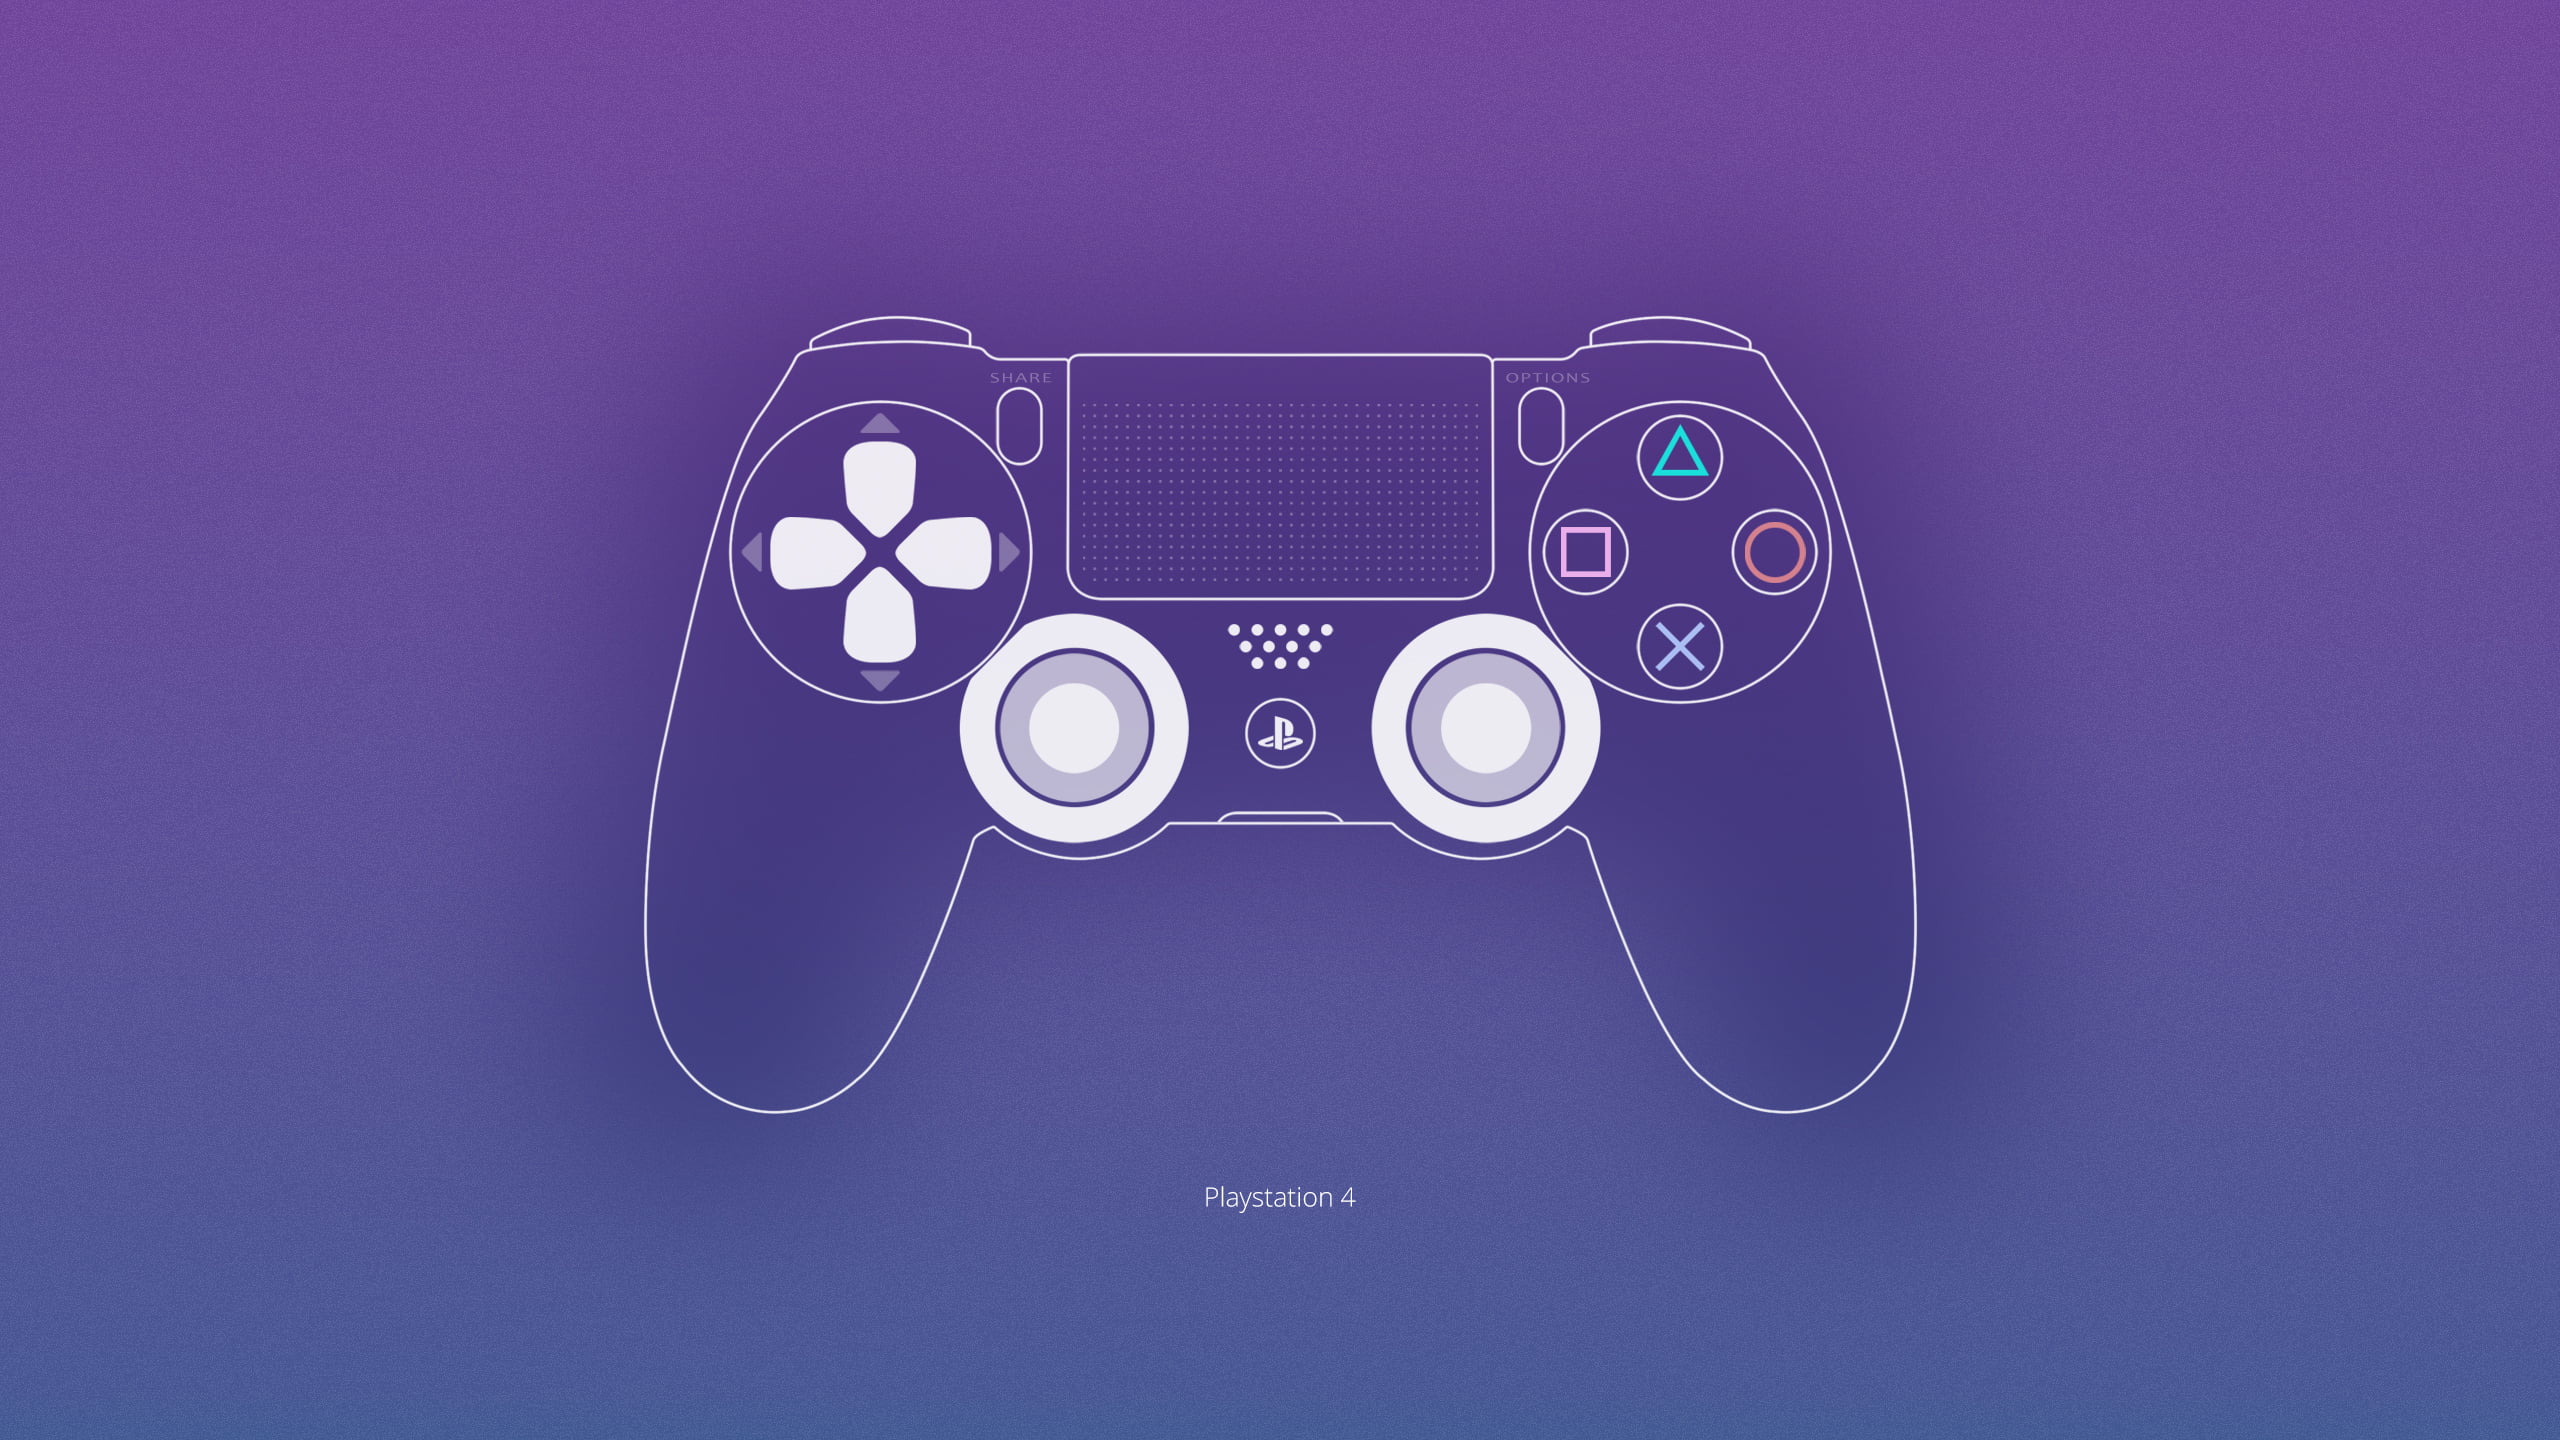 game controller sketch, PS4, Console, Gamepad, Dualshock, music